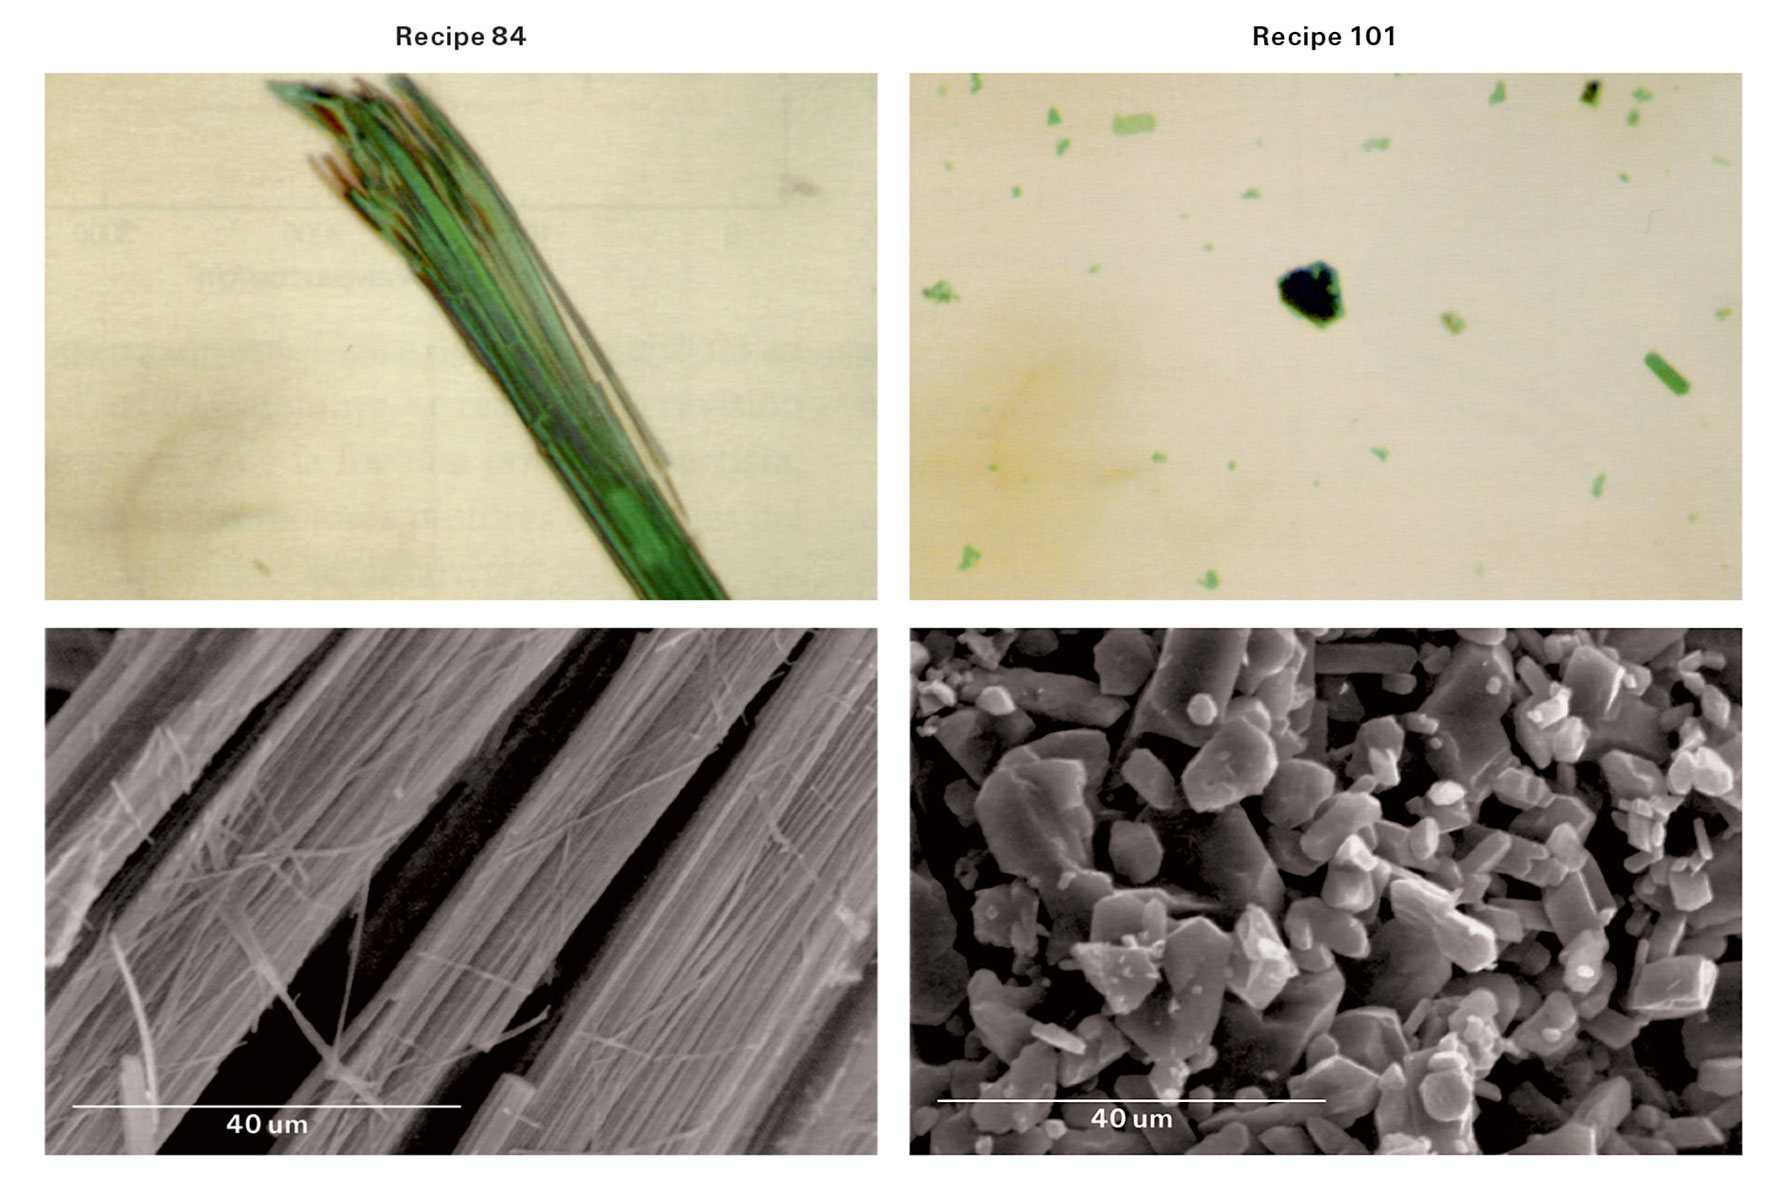 2008 microscope images of verdigris according to recipes eighty-four and one hundred and one from the fifteenth century book “Manoscritto Bolognese.”